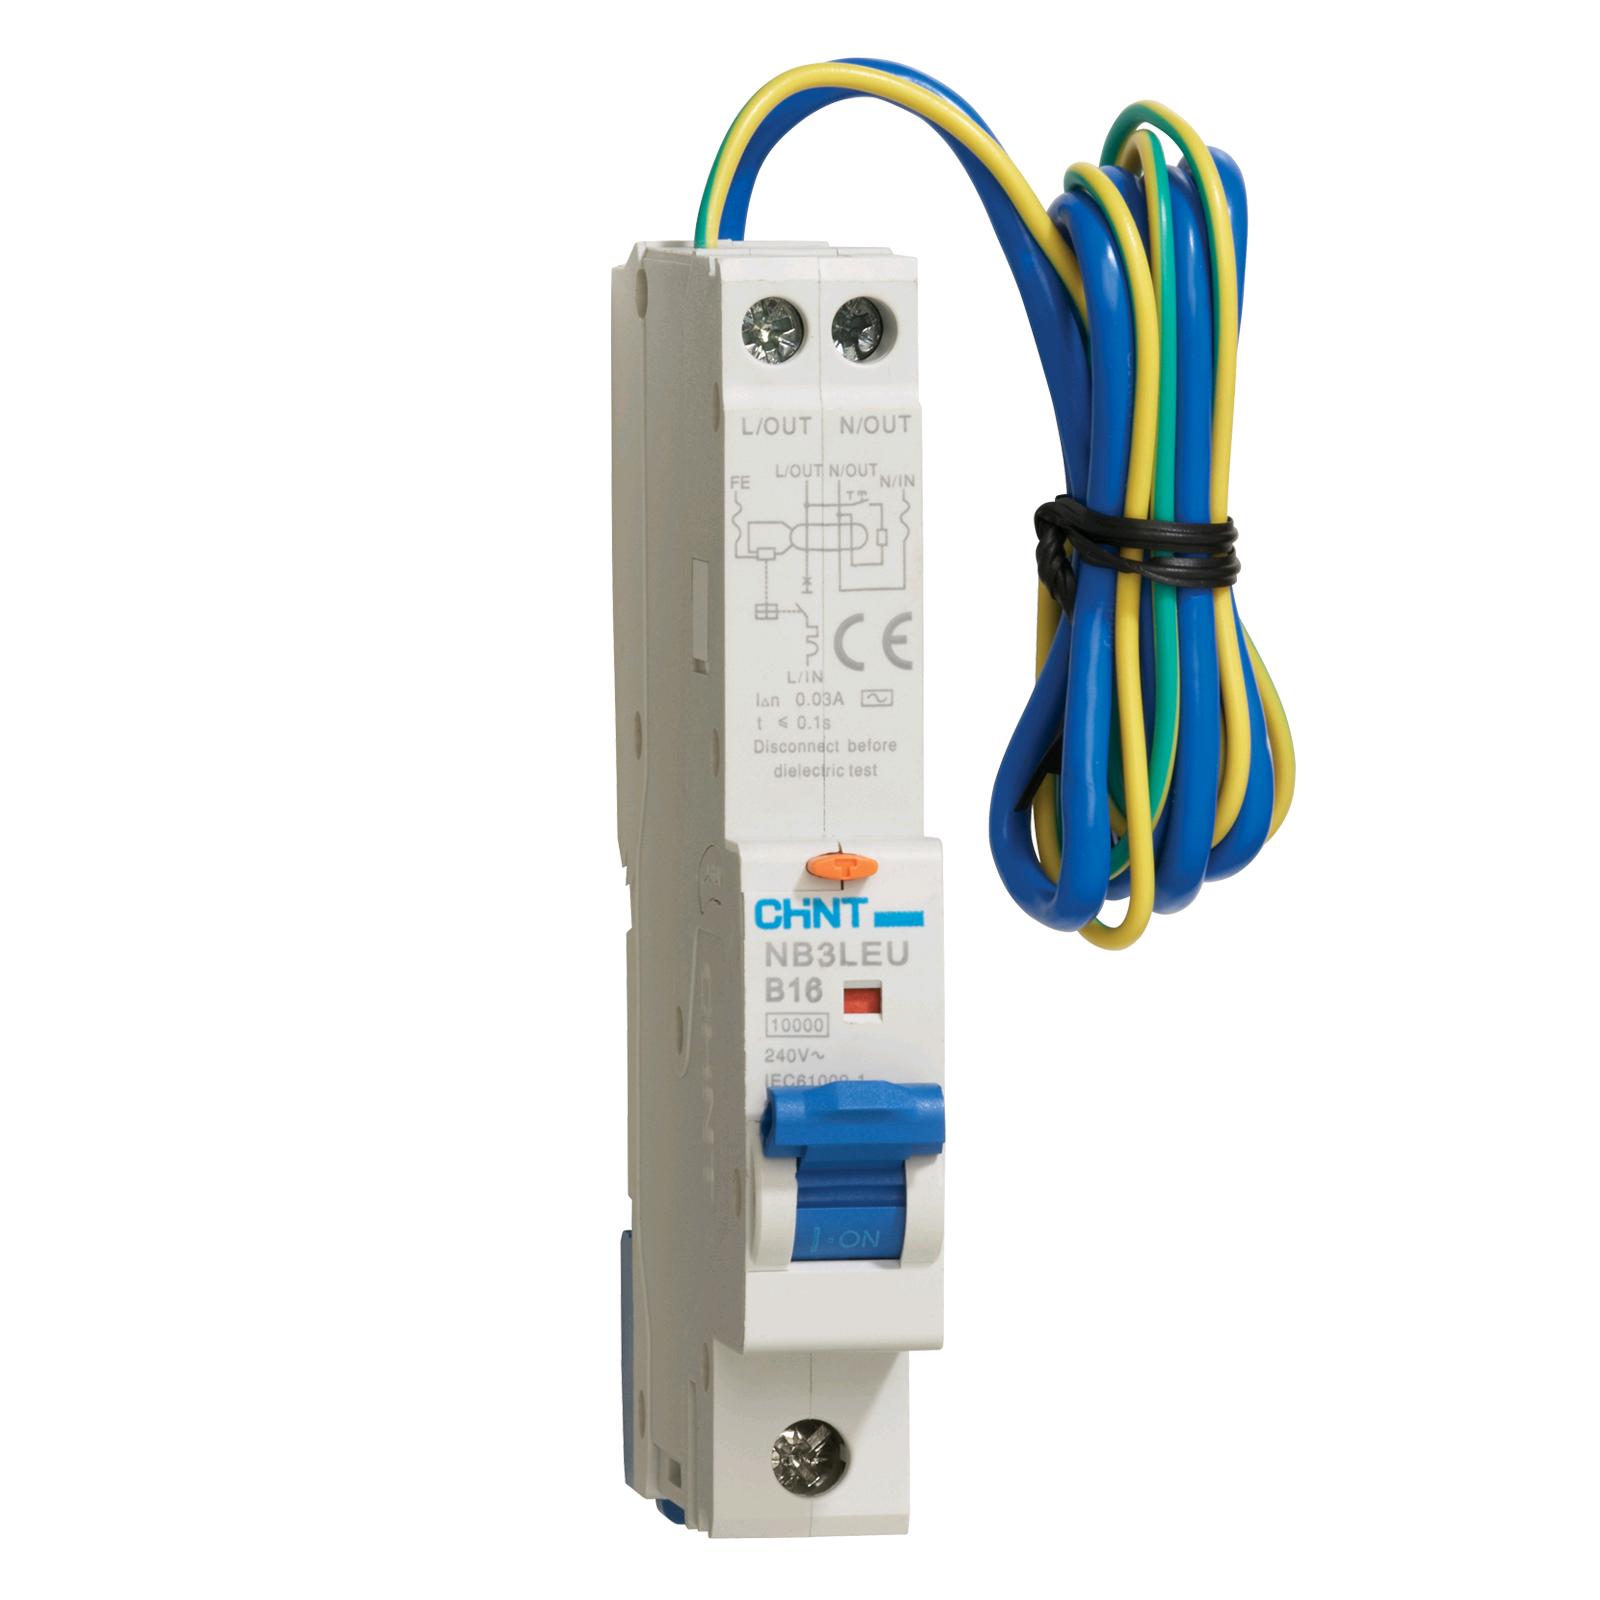 Chint 25a 30mA RCBO "B" Rated 